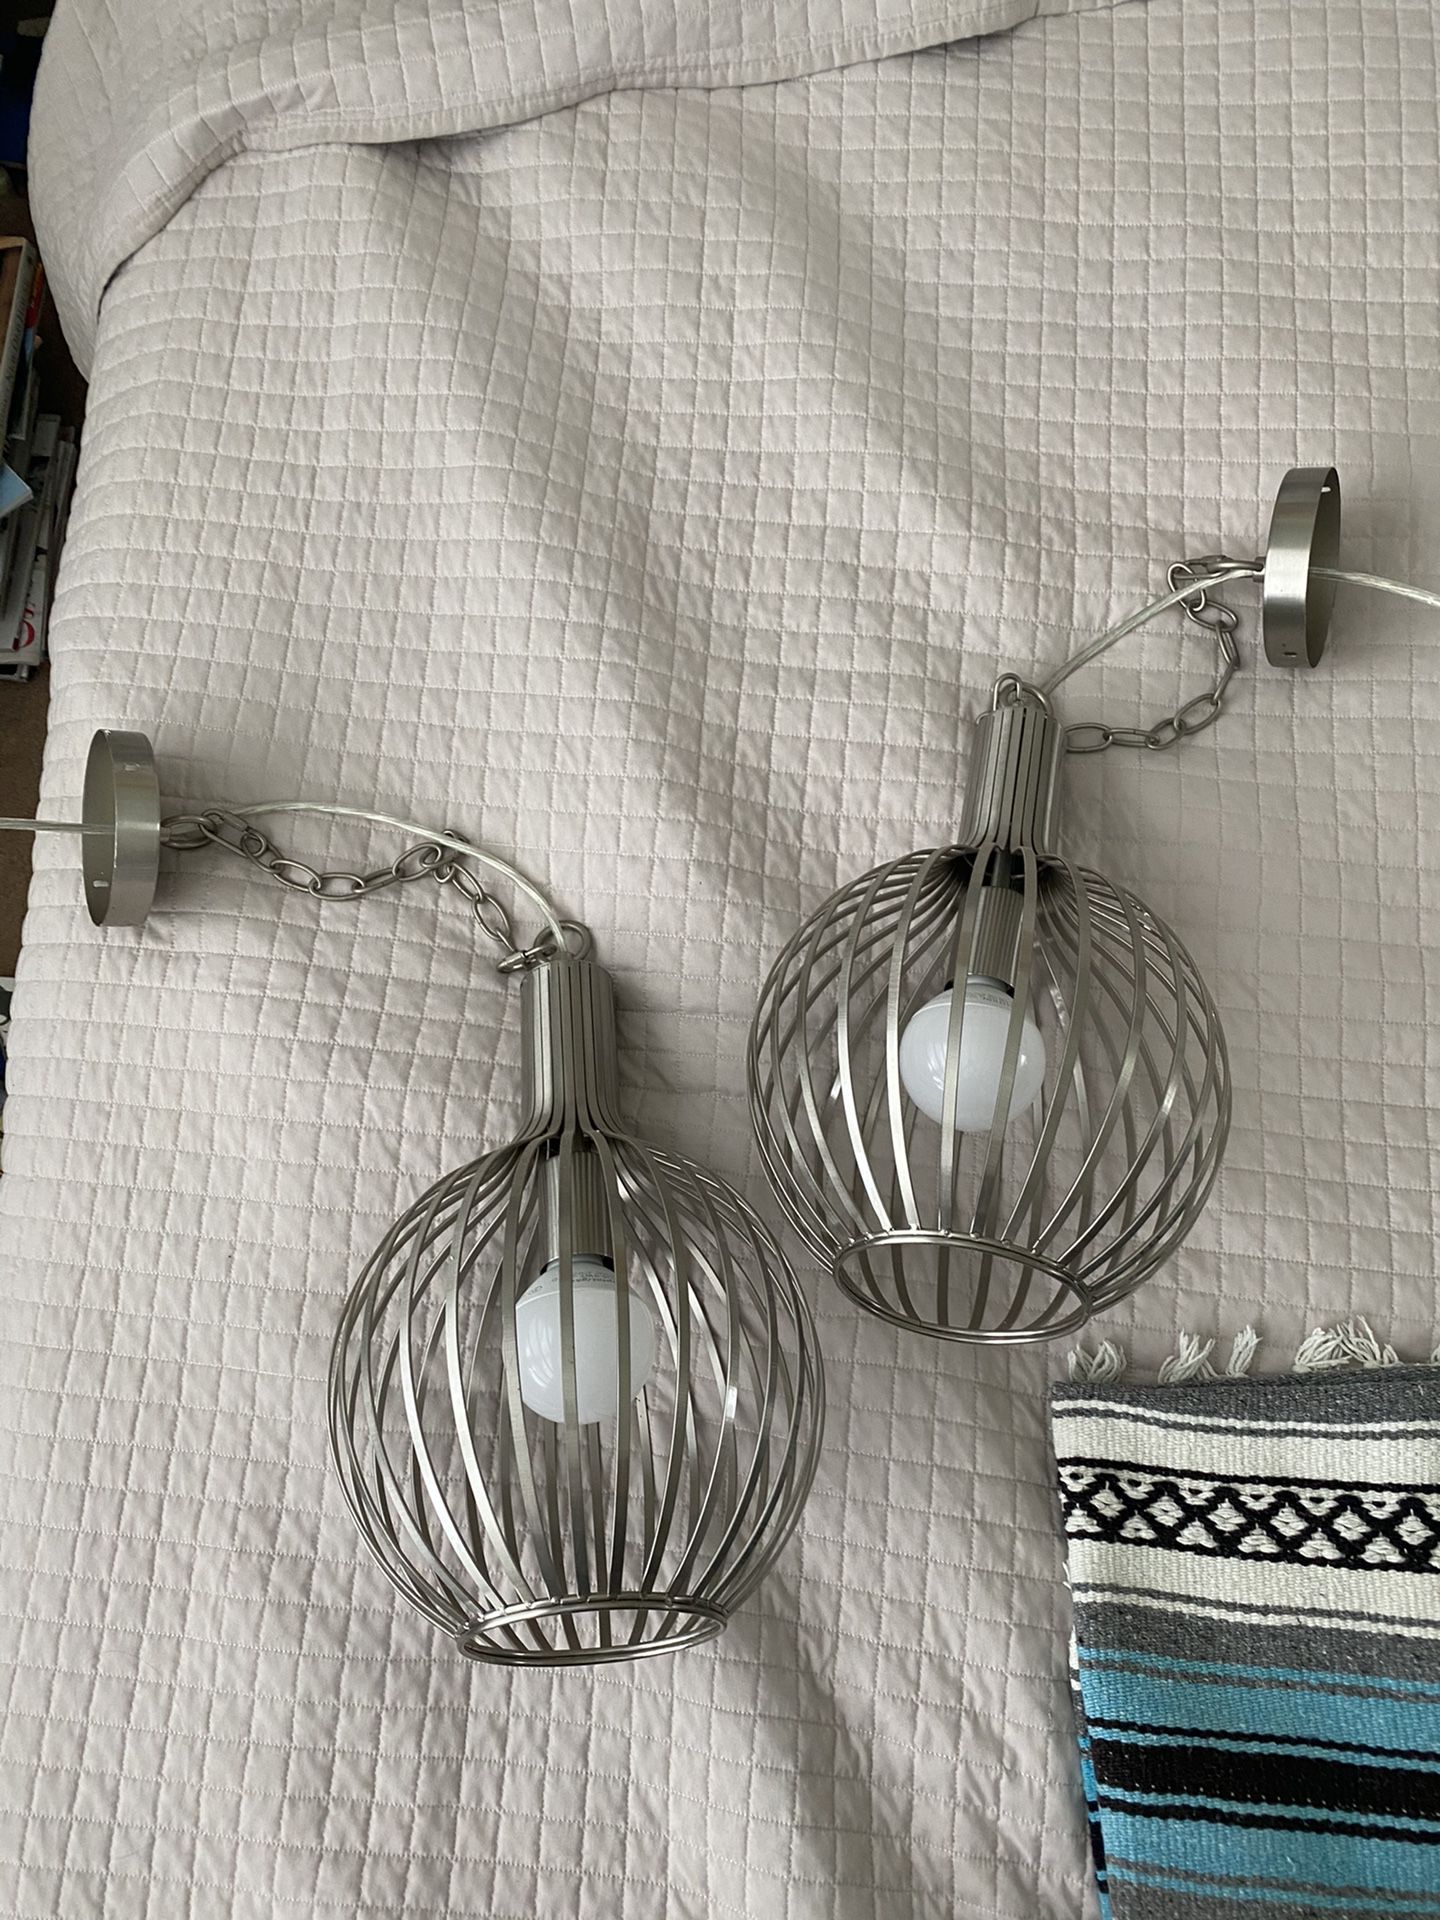 Two modern hanging lamps - 1.5” round